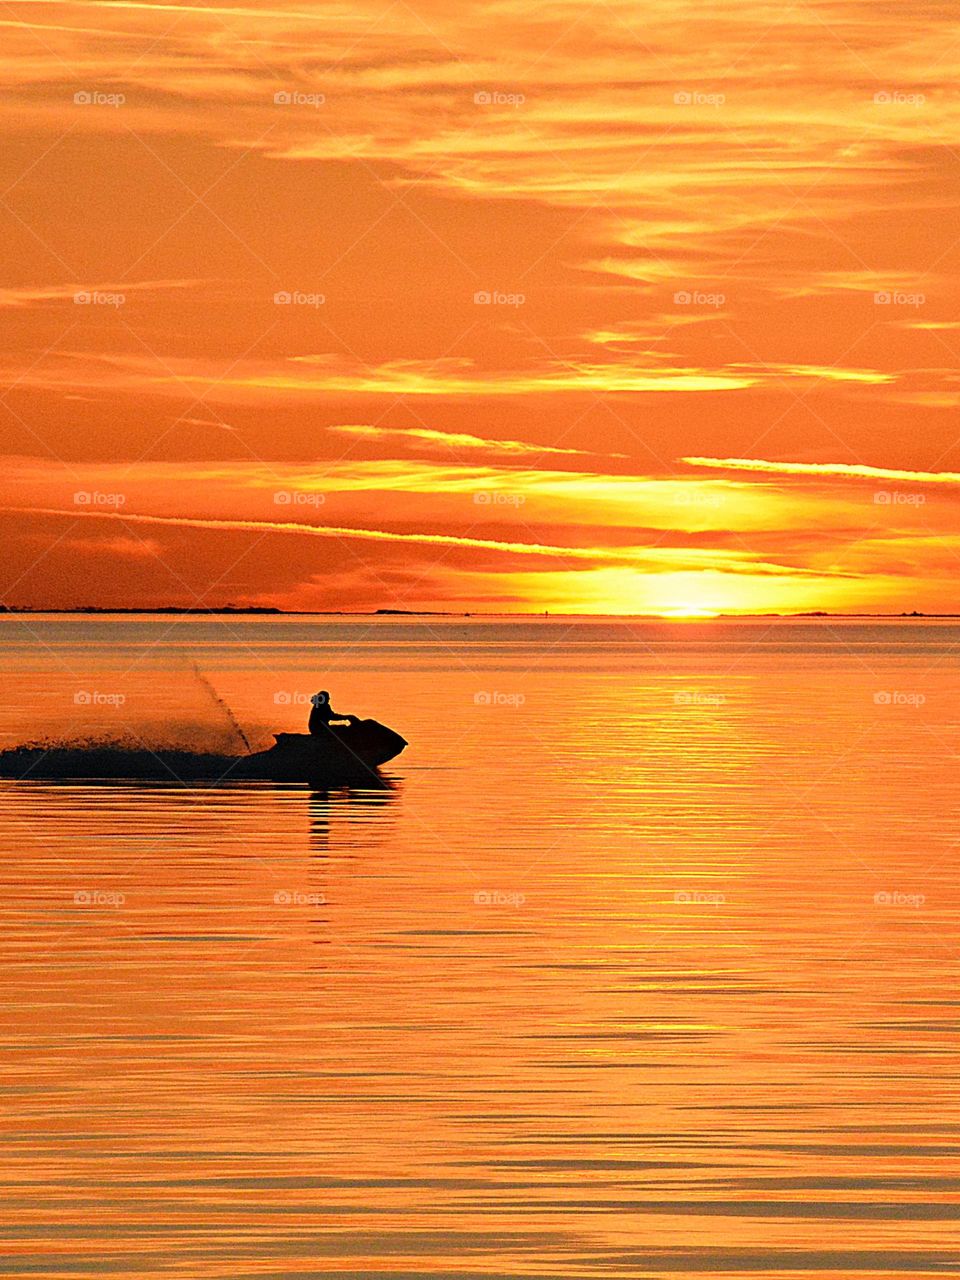 A silhouette of a man and his skidoo crosses the bay during a descending sunset as it throws up a rooster tail